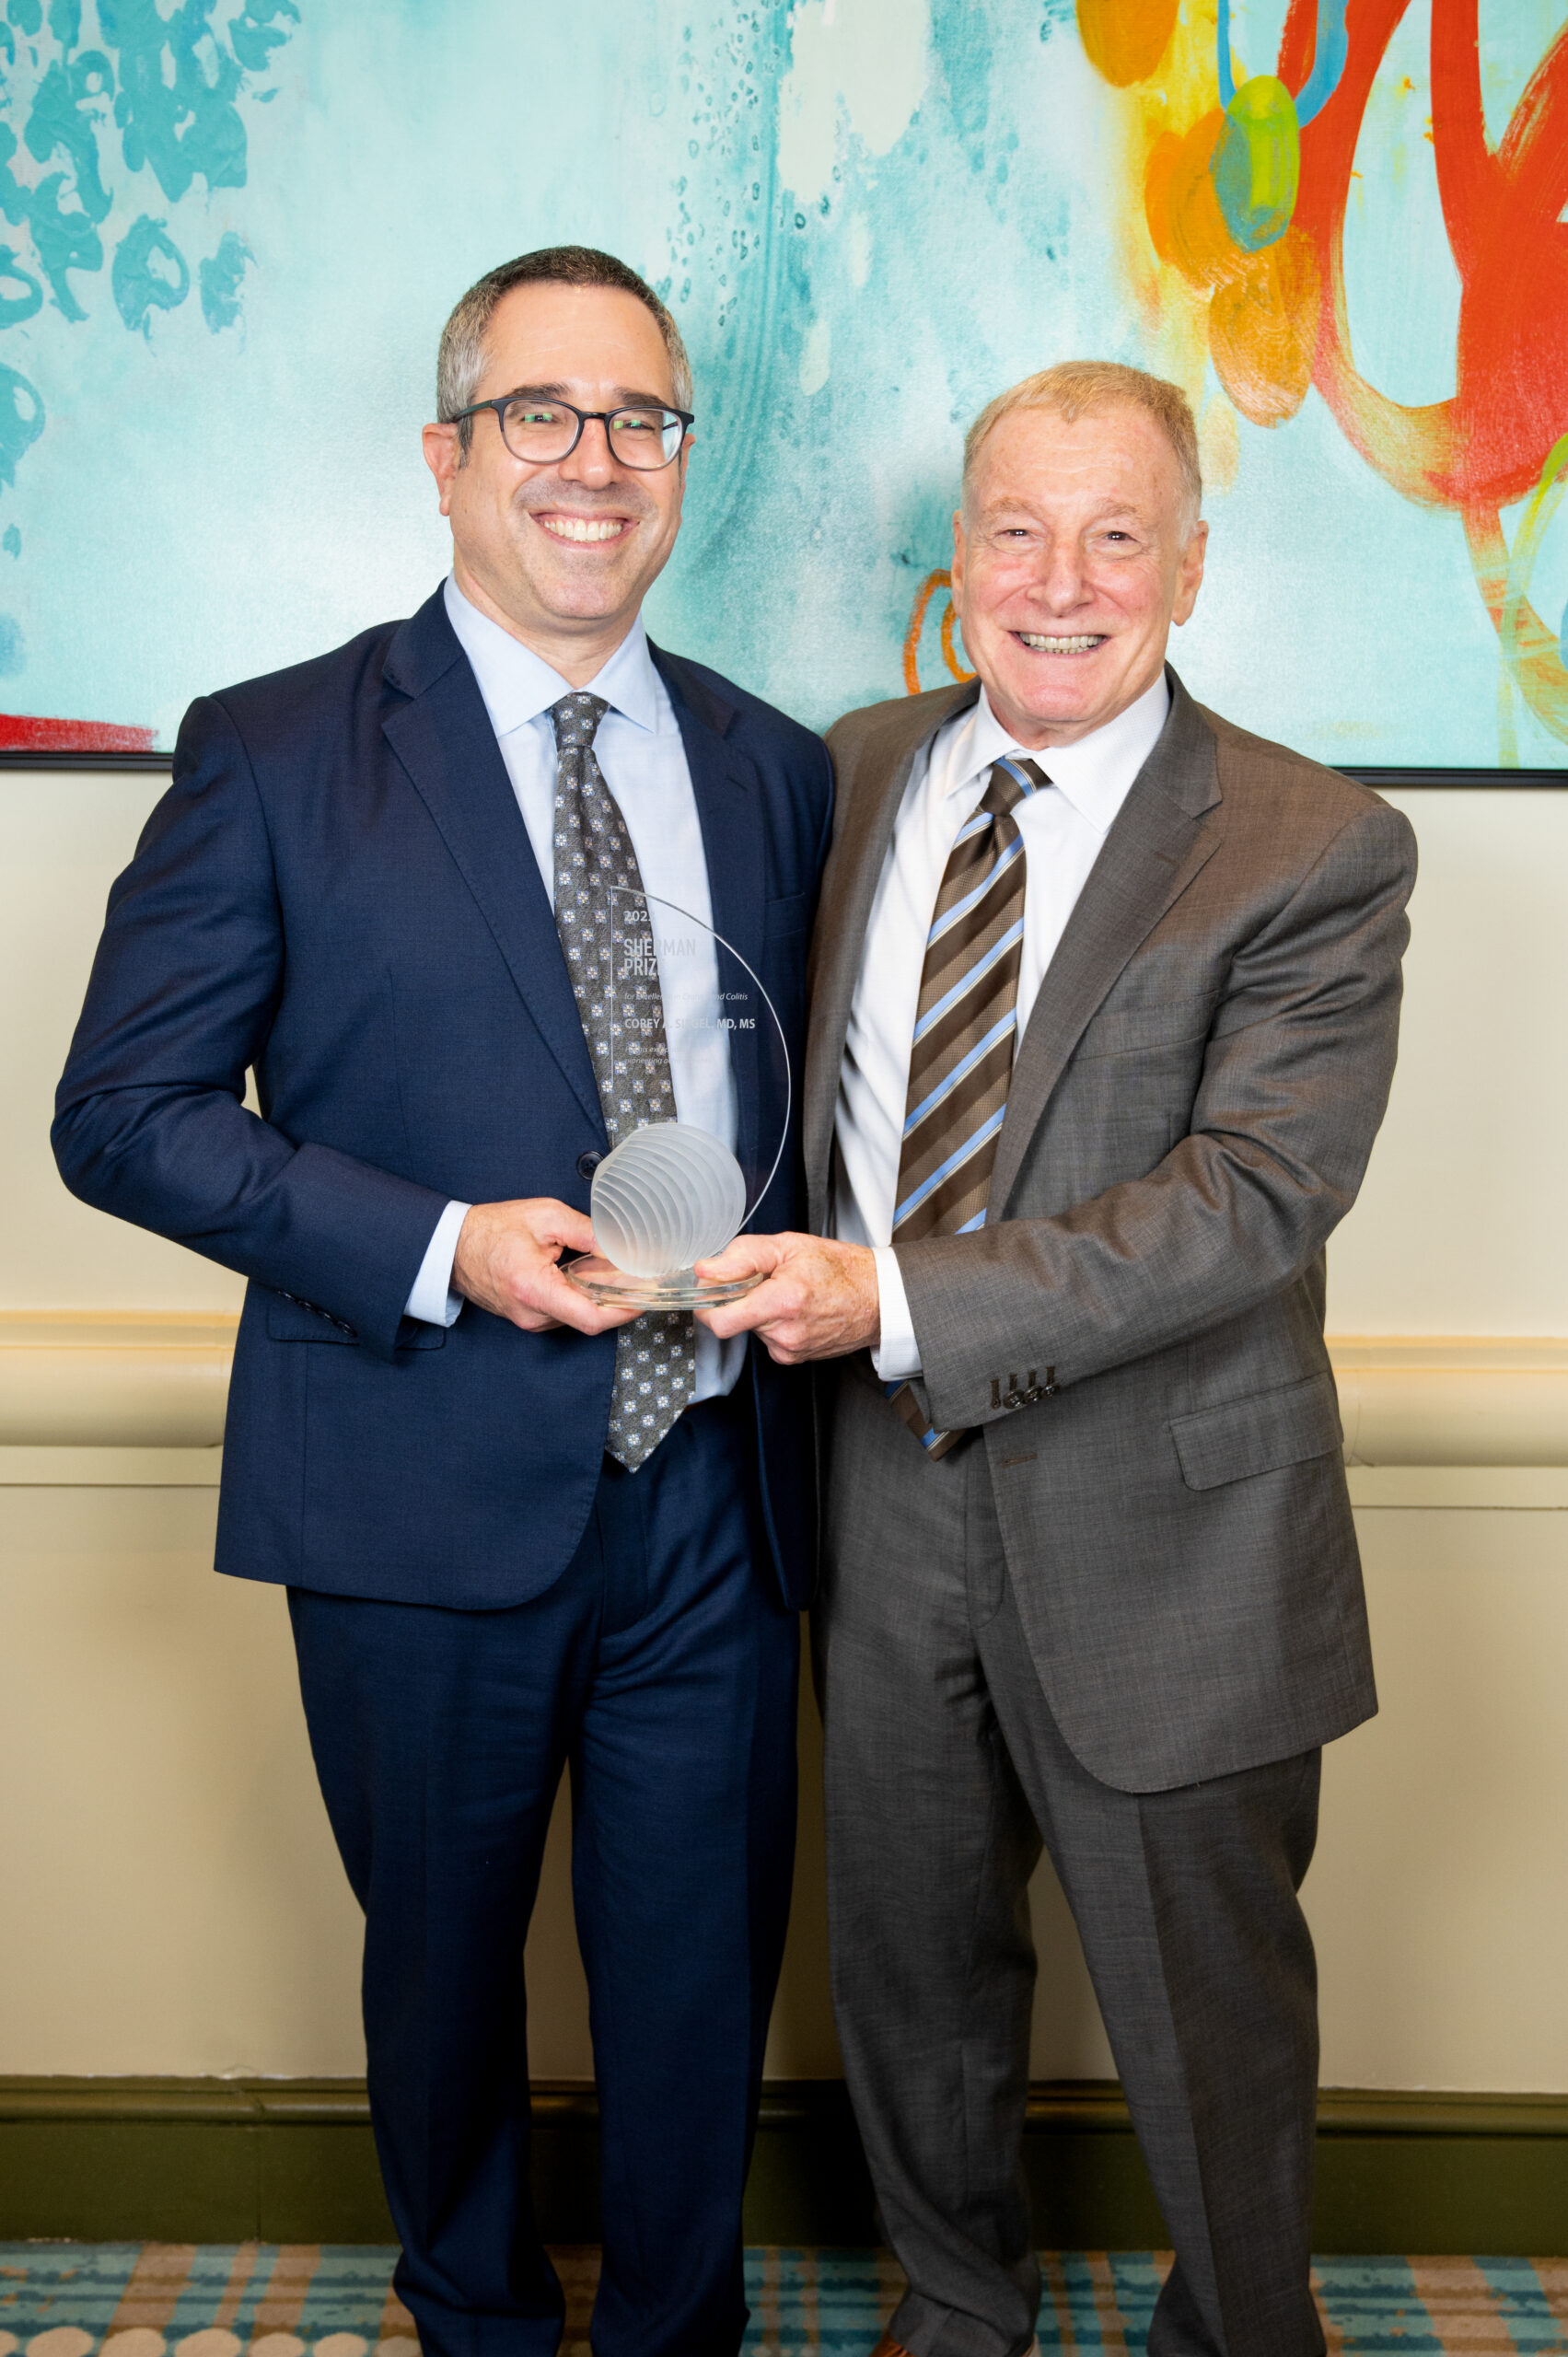 <p>2023 Sherman Prize Recipient Corey A. Siegel, MD, MS and 2023 Selection Committee Member Stephen B. Hanauer, MD, FACG</p>
